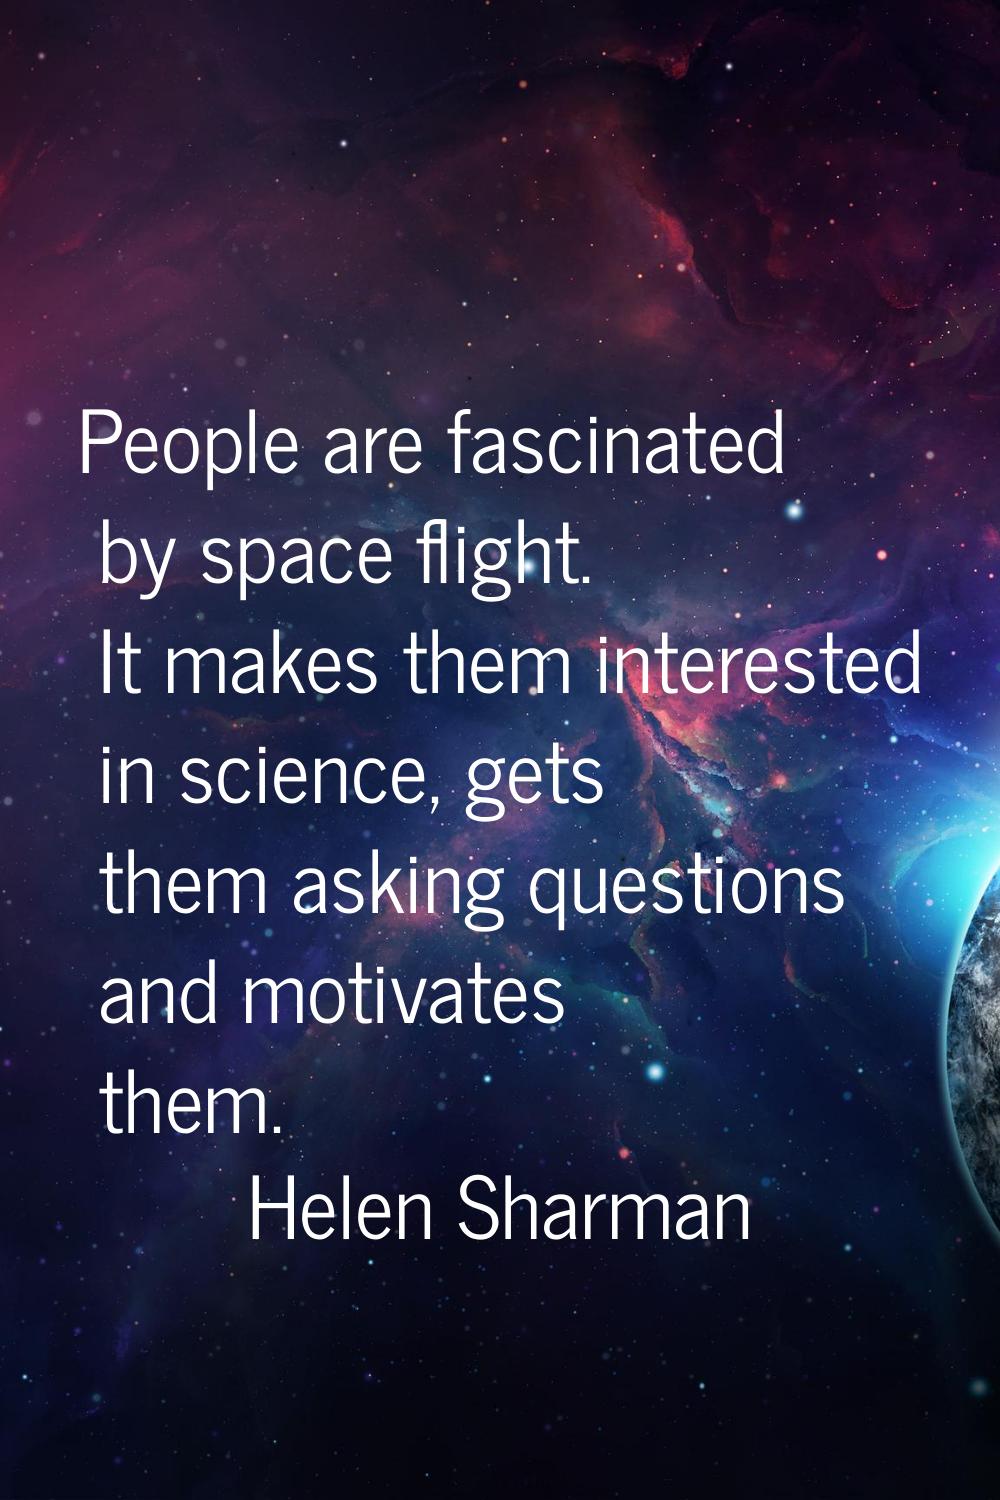 People are fascinated by space flight. It makes them interested in science, gets them asking questi